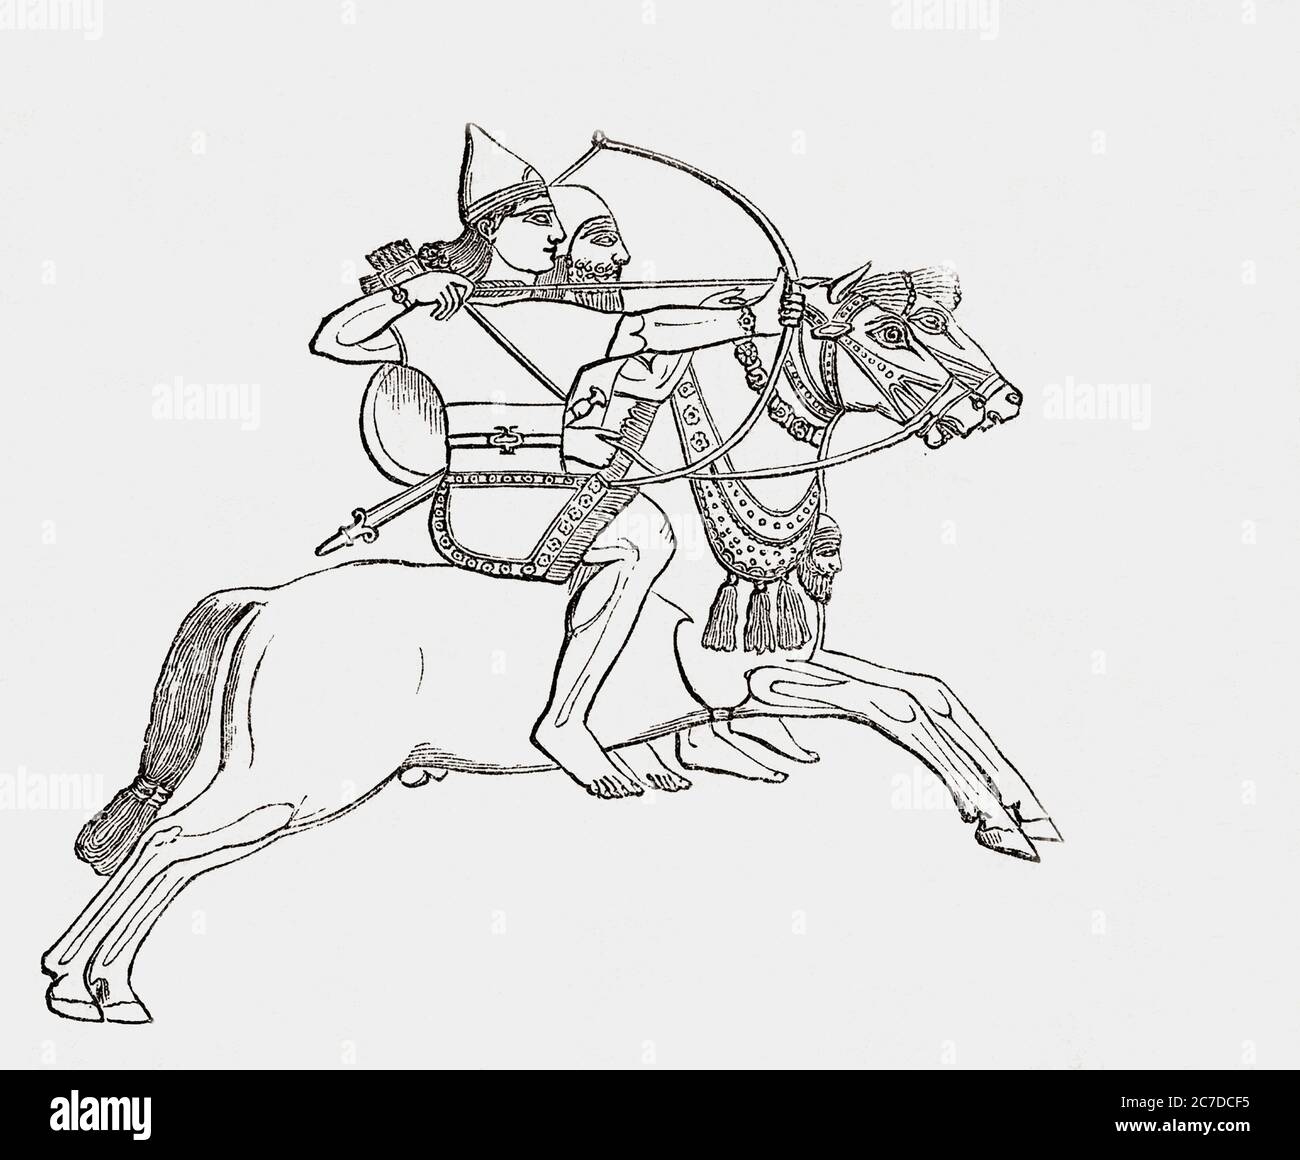 Assyrian archers on horseback.  After an illustration by an unidentified 19th century artist from a bas relief in Nimrud. Stock Photo